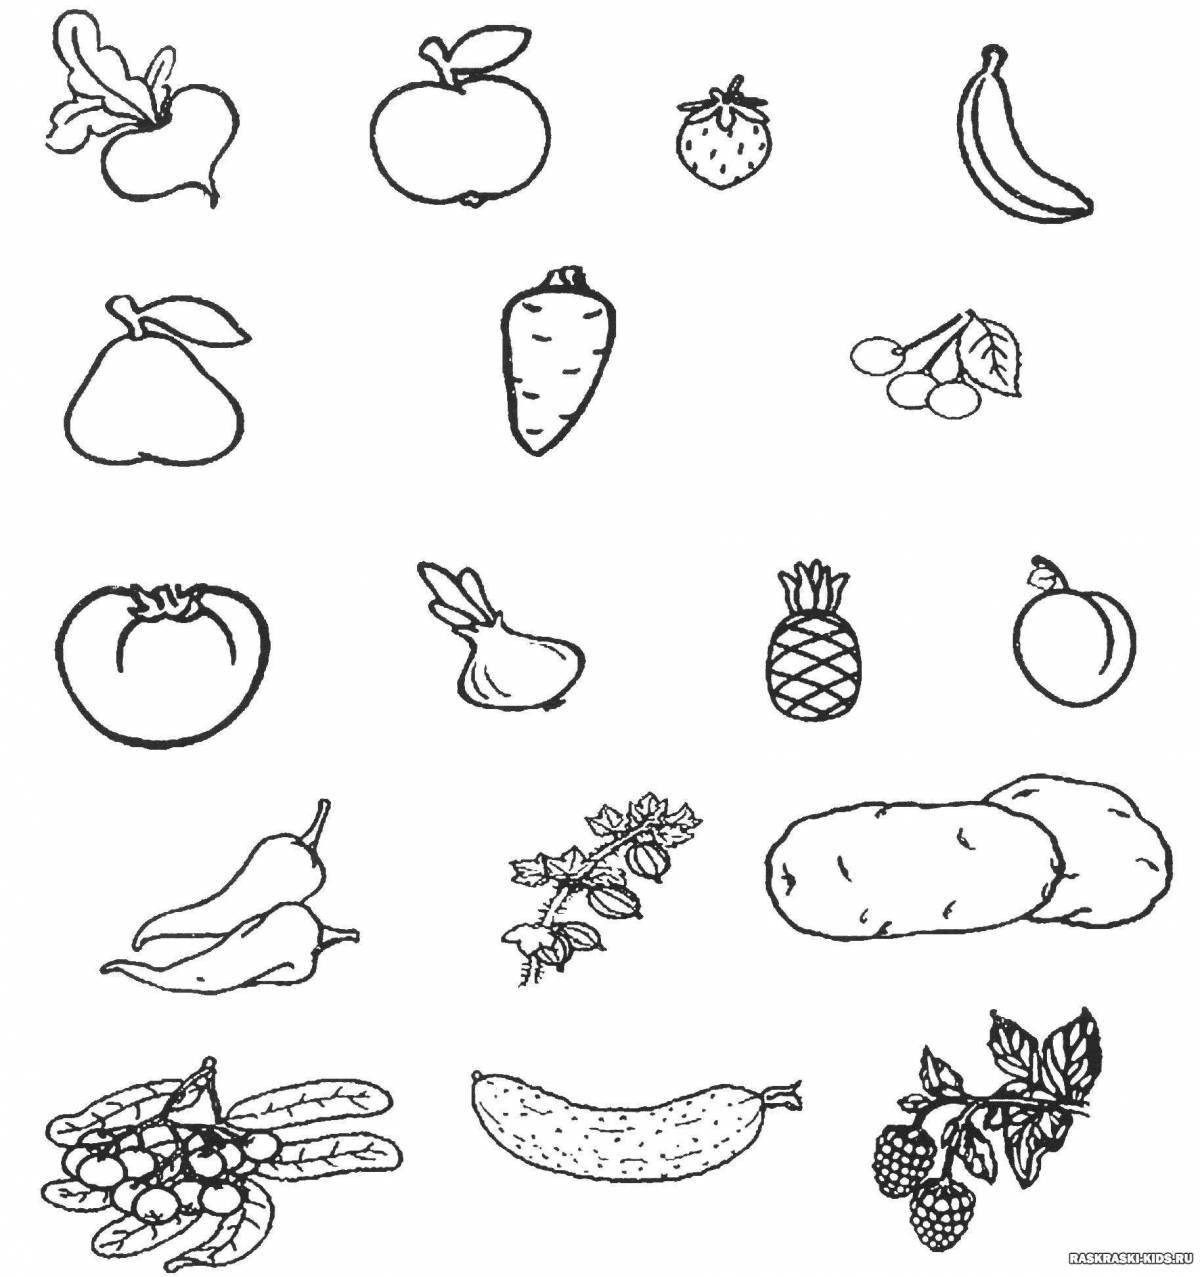 Awesome vegetable and fruit coloring page